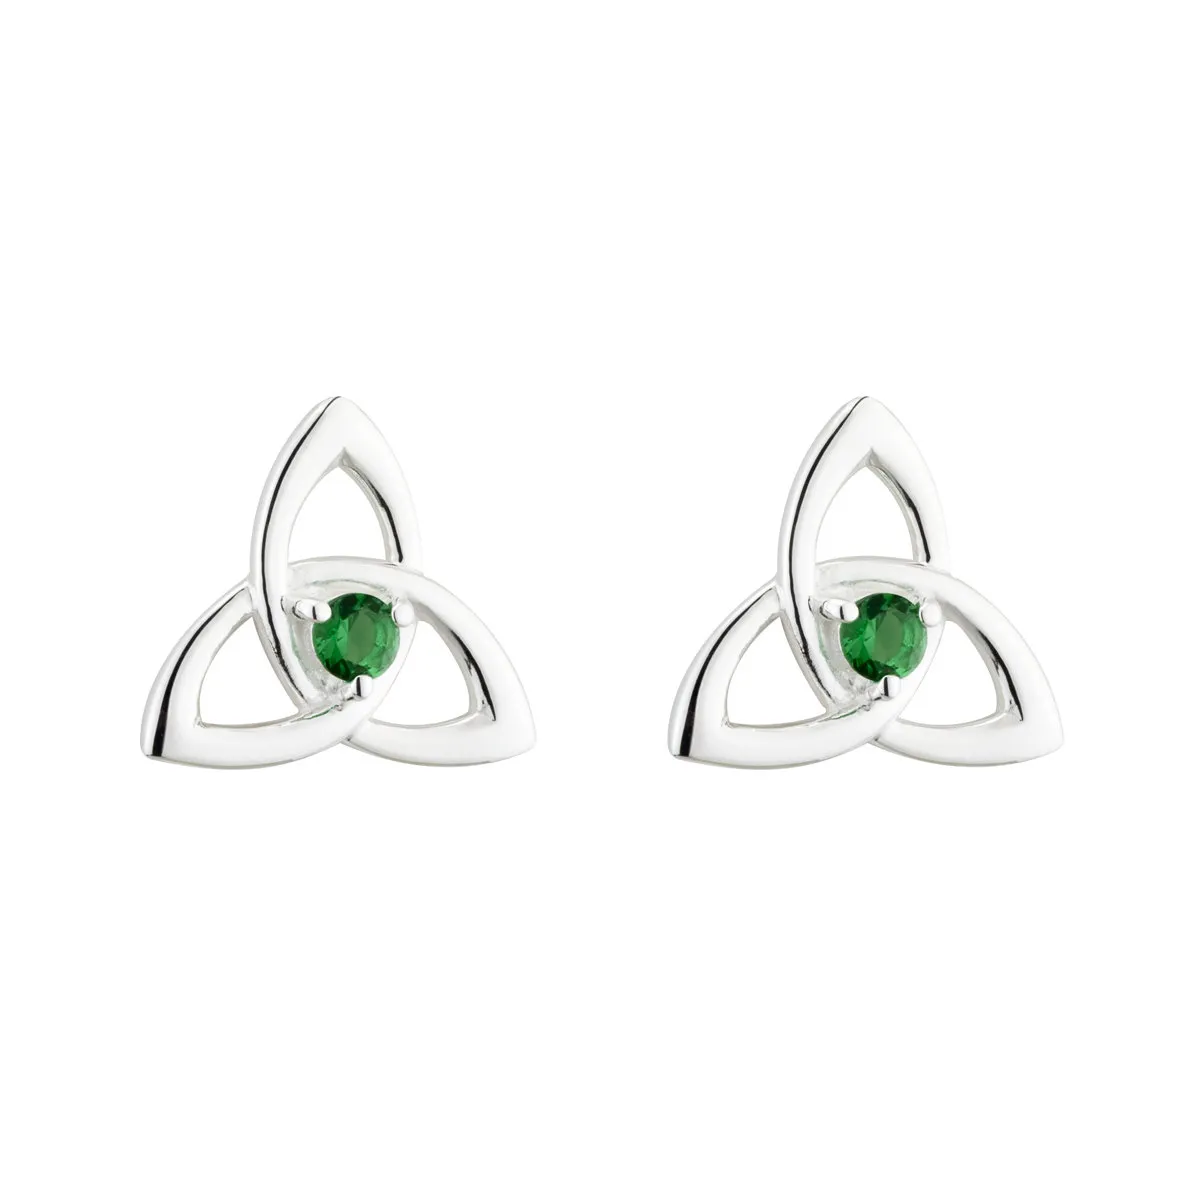 Silver Trinity Knot Stud Earrings With Green Crystals...